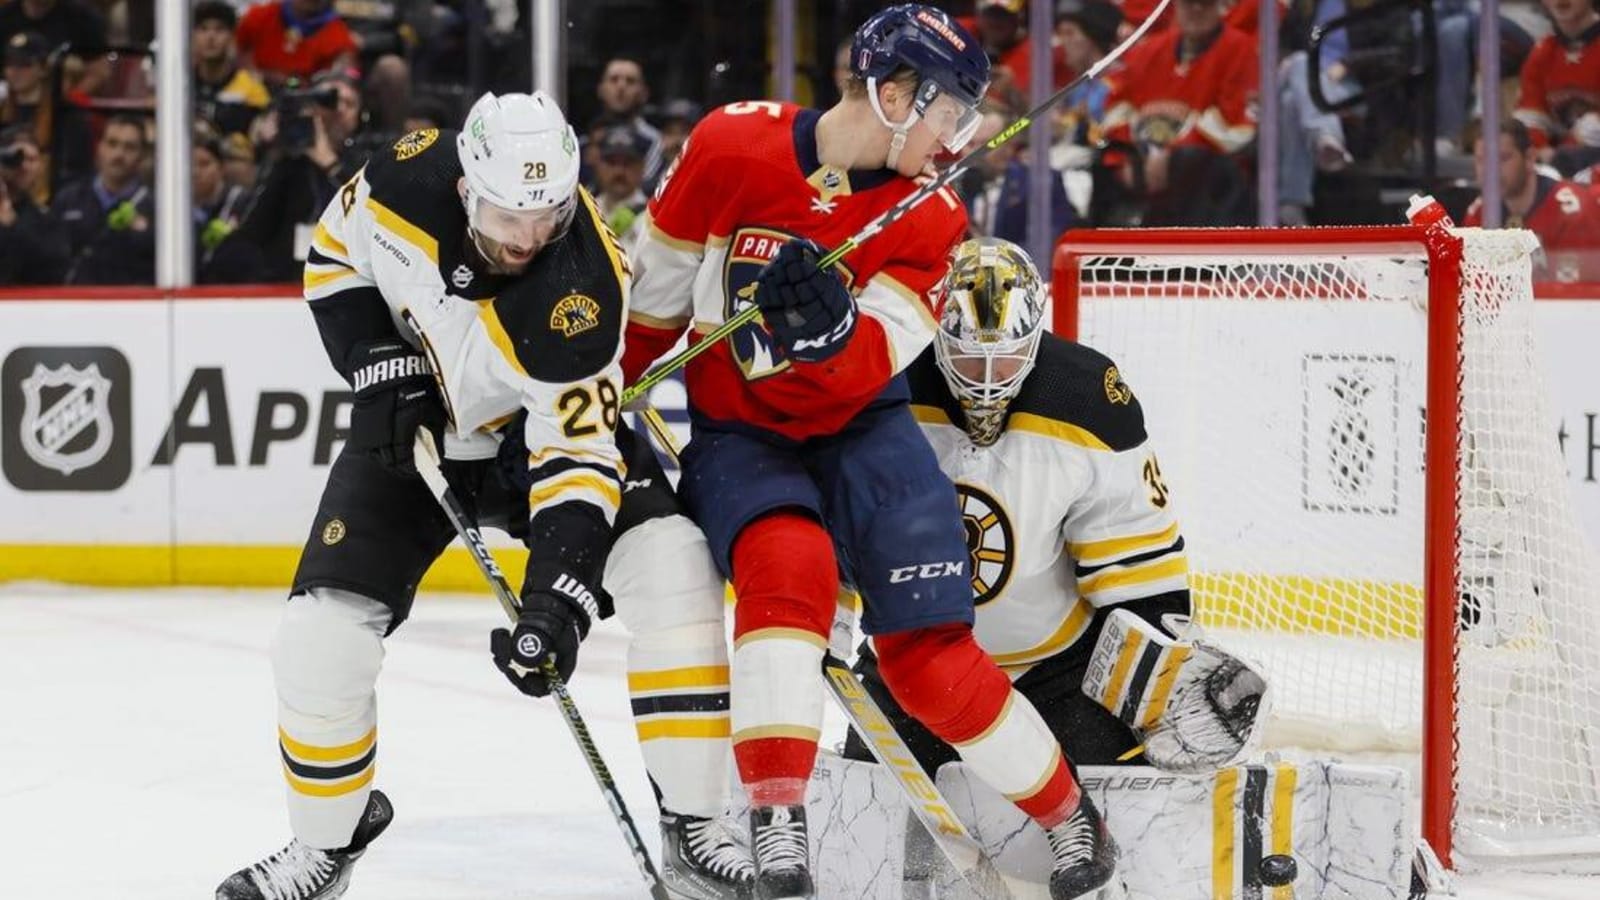 Bruins dominate Panthers to take 2-1 series lead